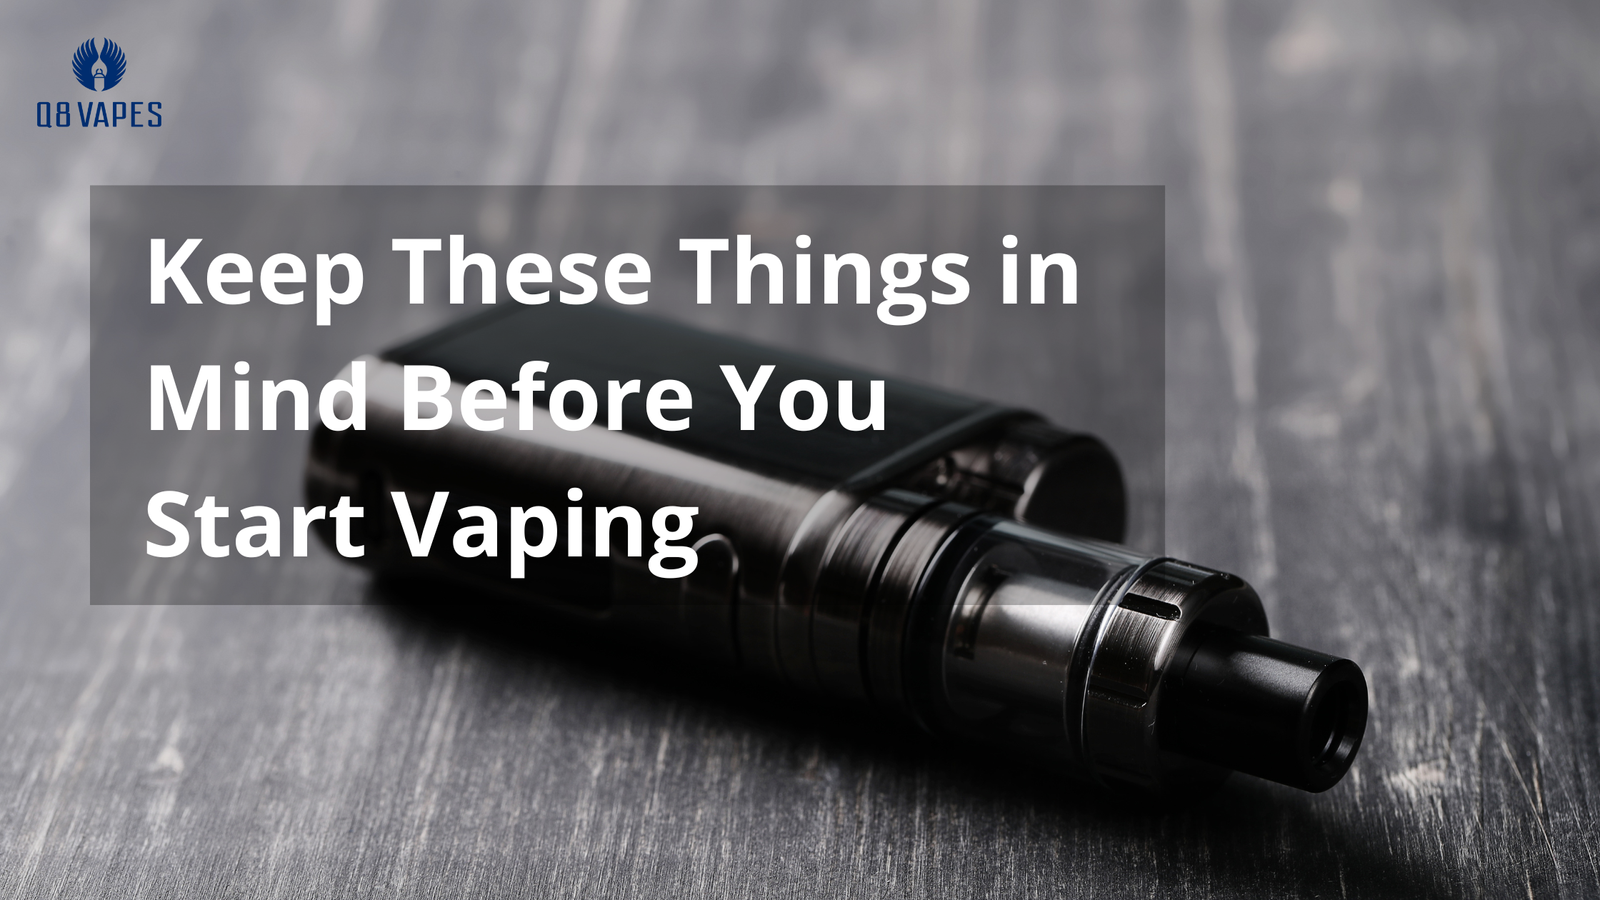 Keep These Things in Mind Before You Start Vaping